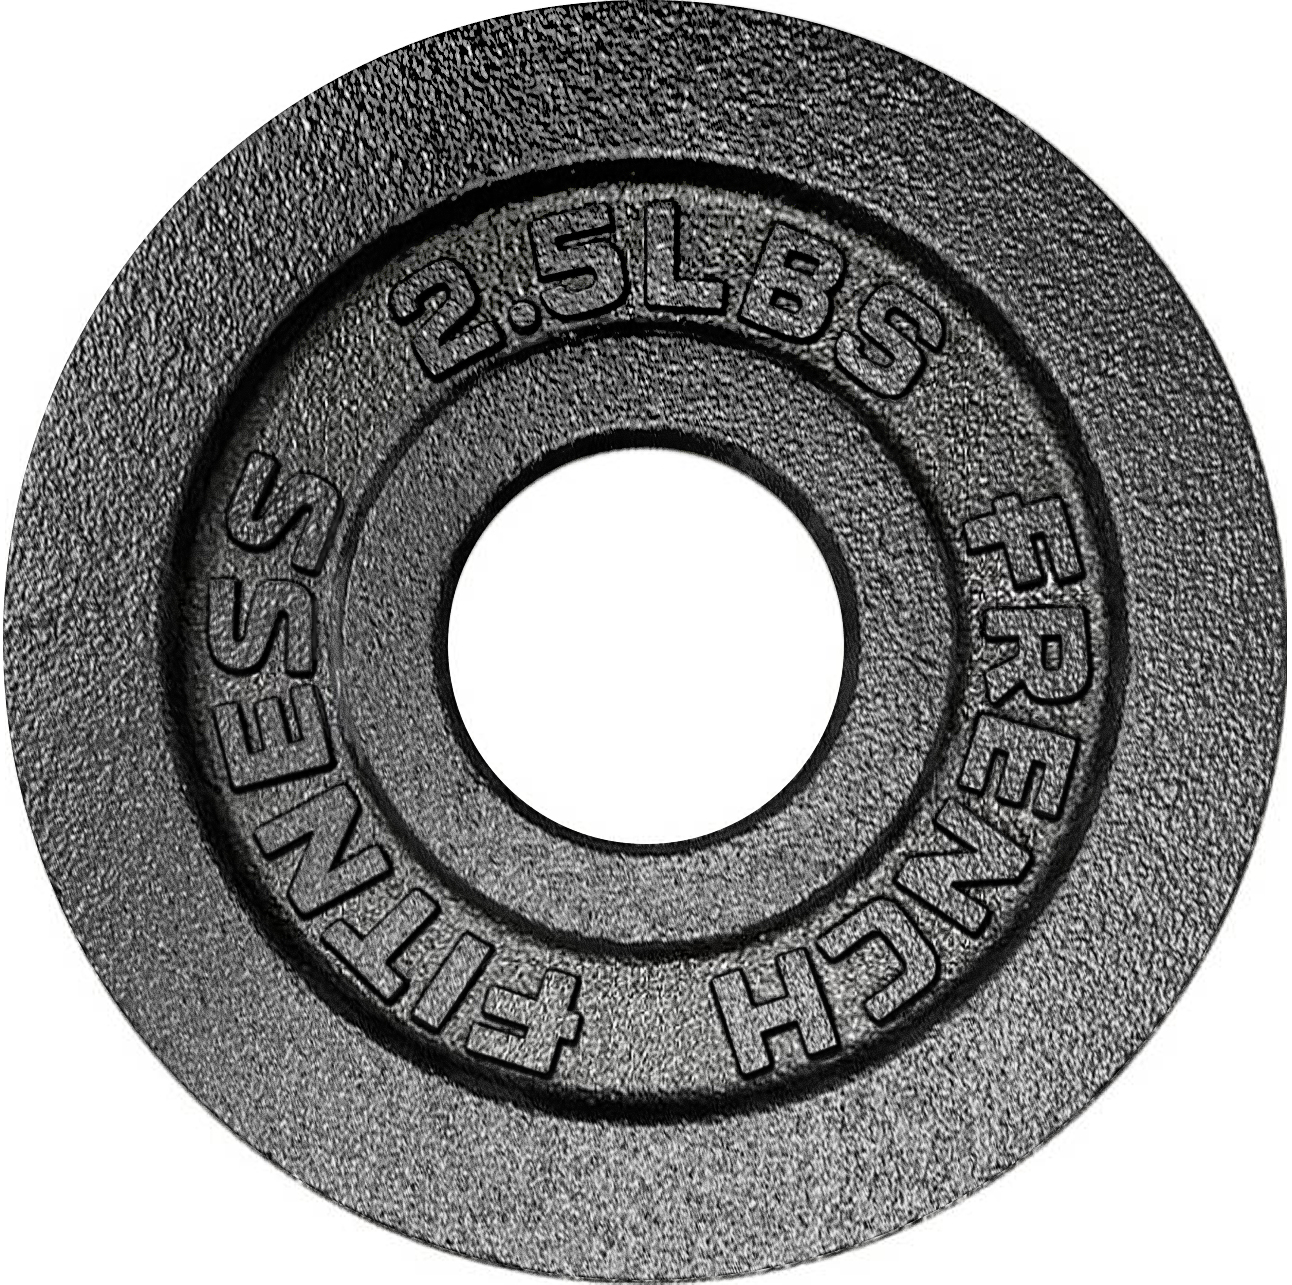 French Fitness Cast Iron Olympic Weight Plate V1 2.5 lbs (New)